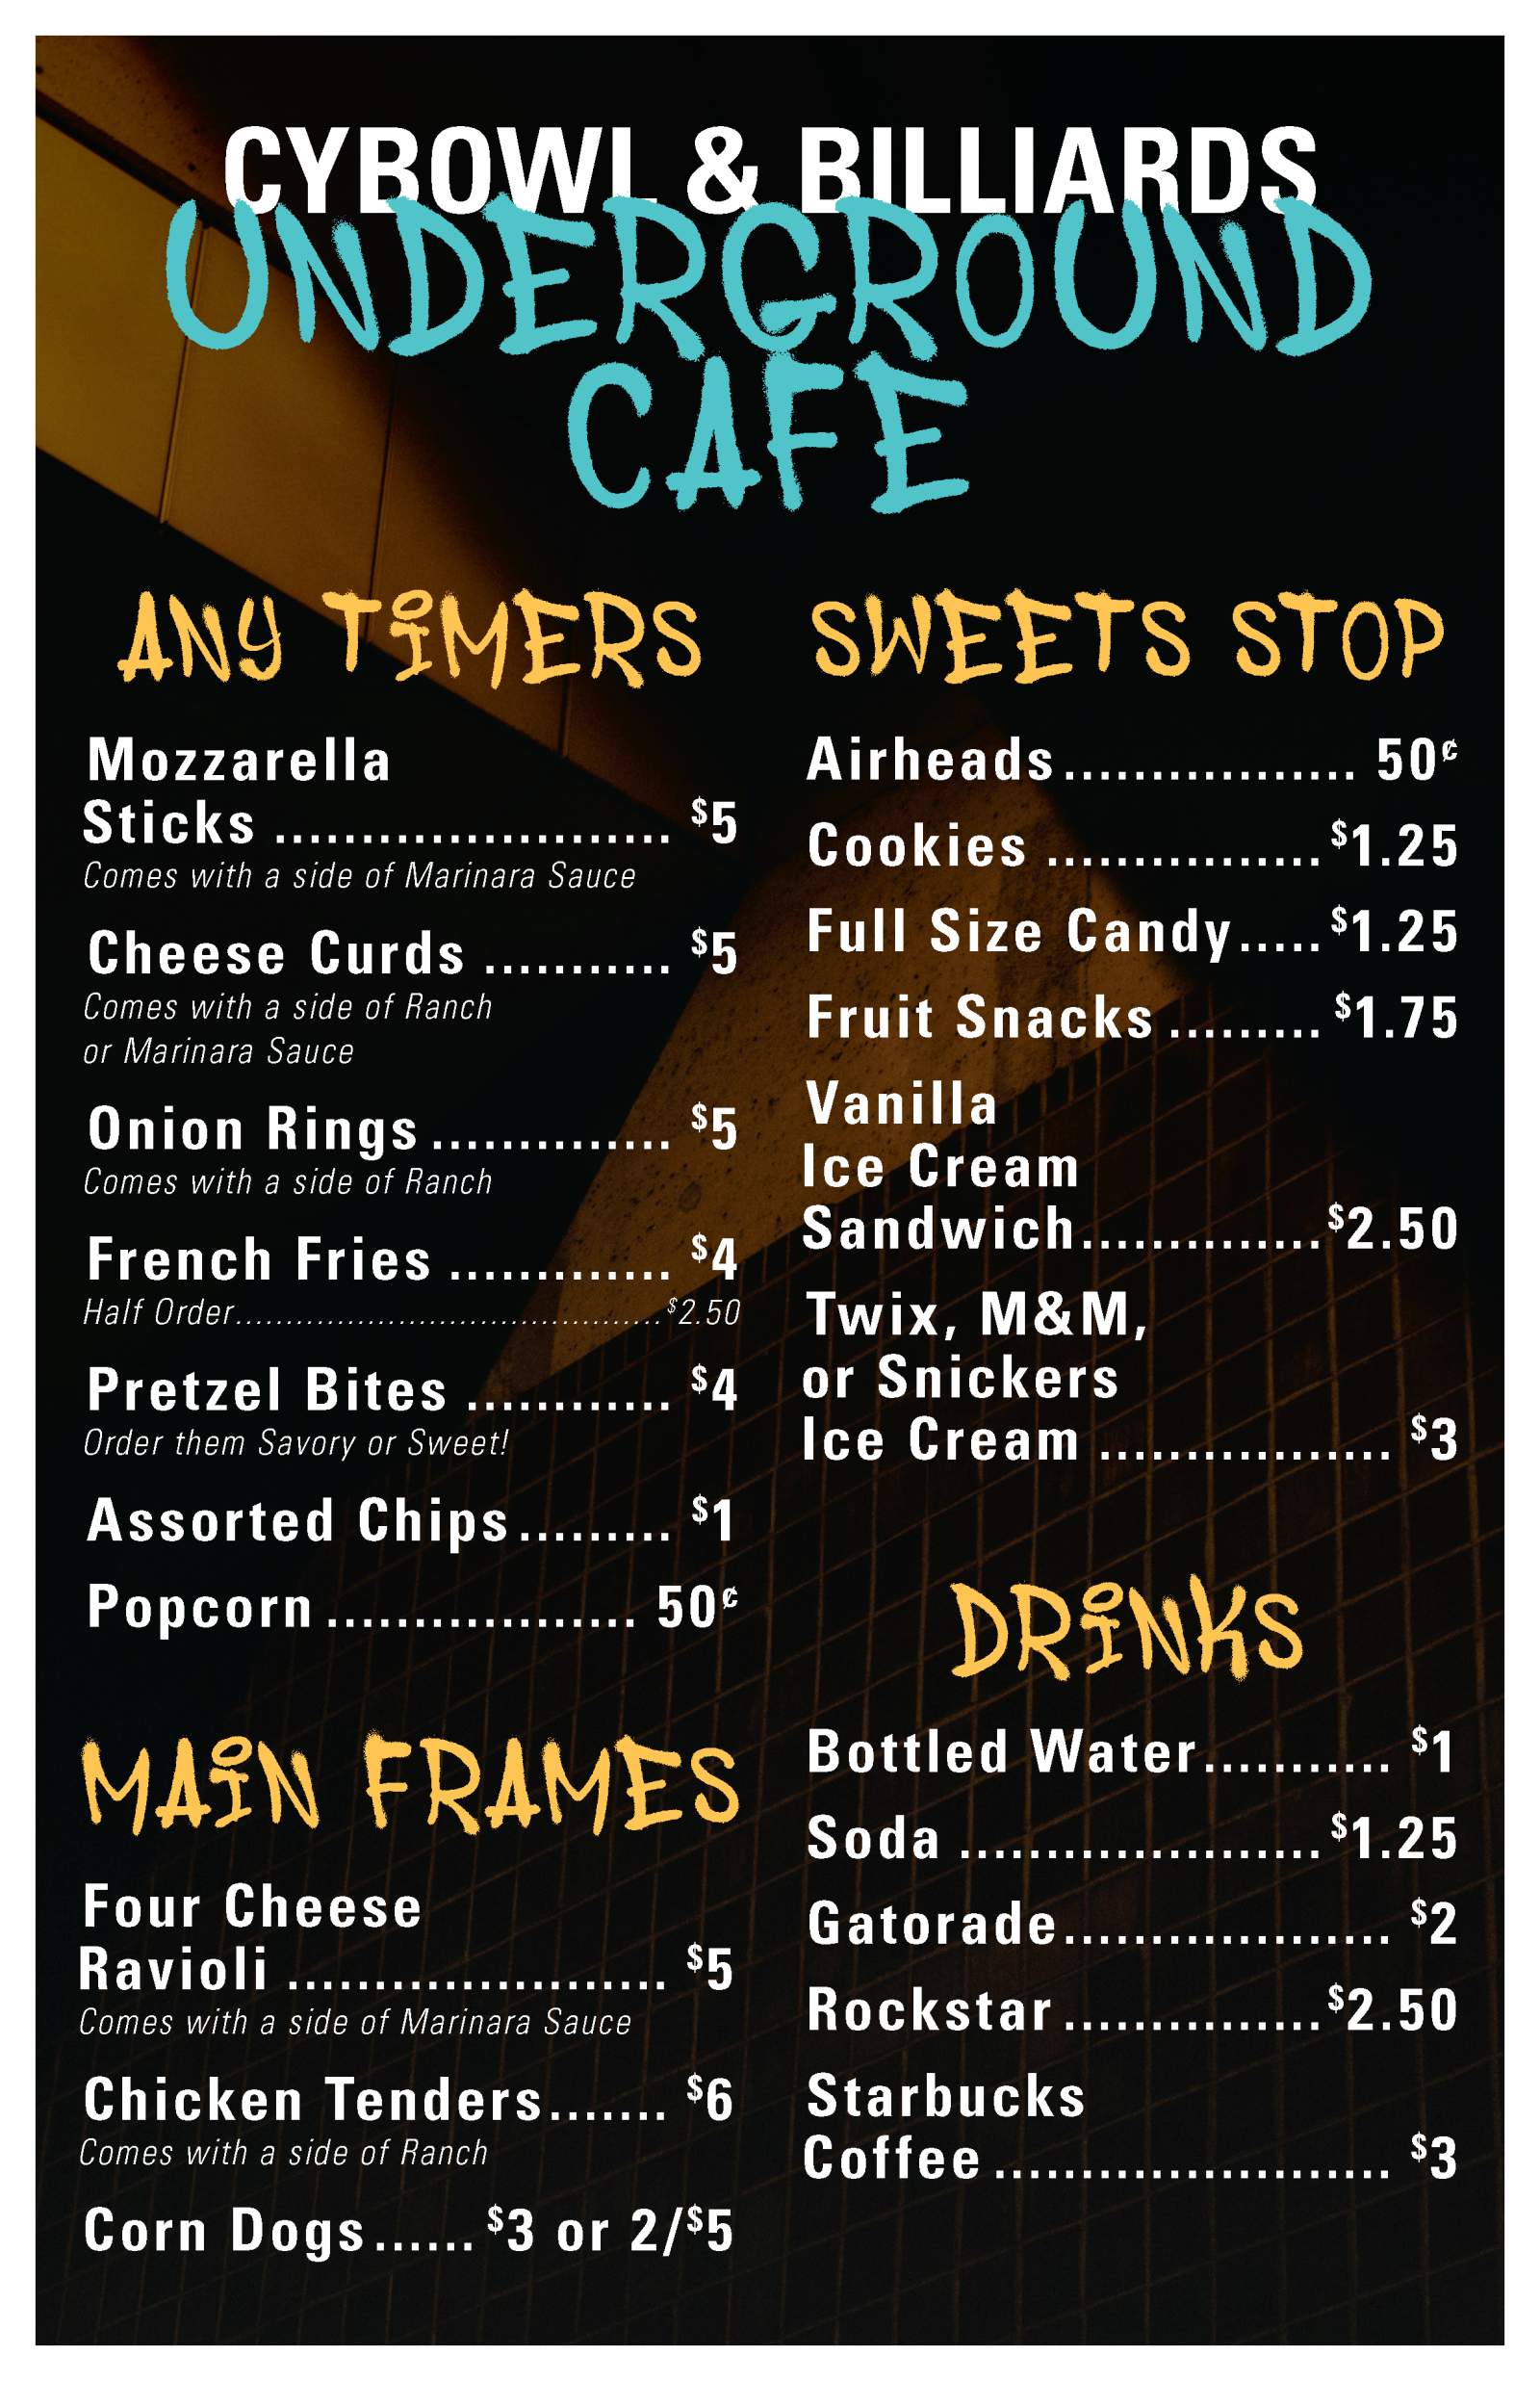 An image of the Underground Cafe Menu